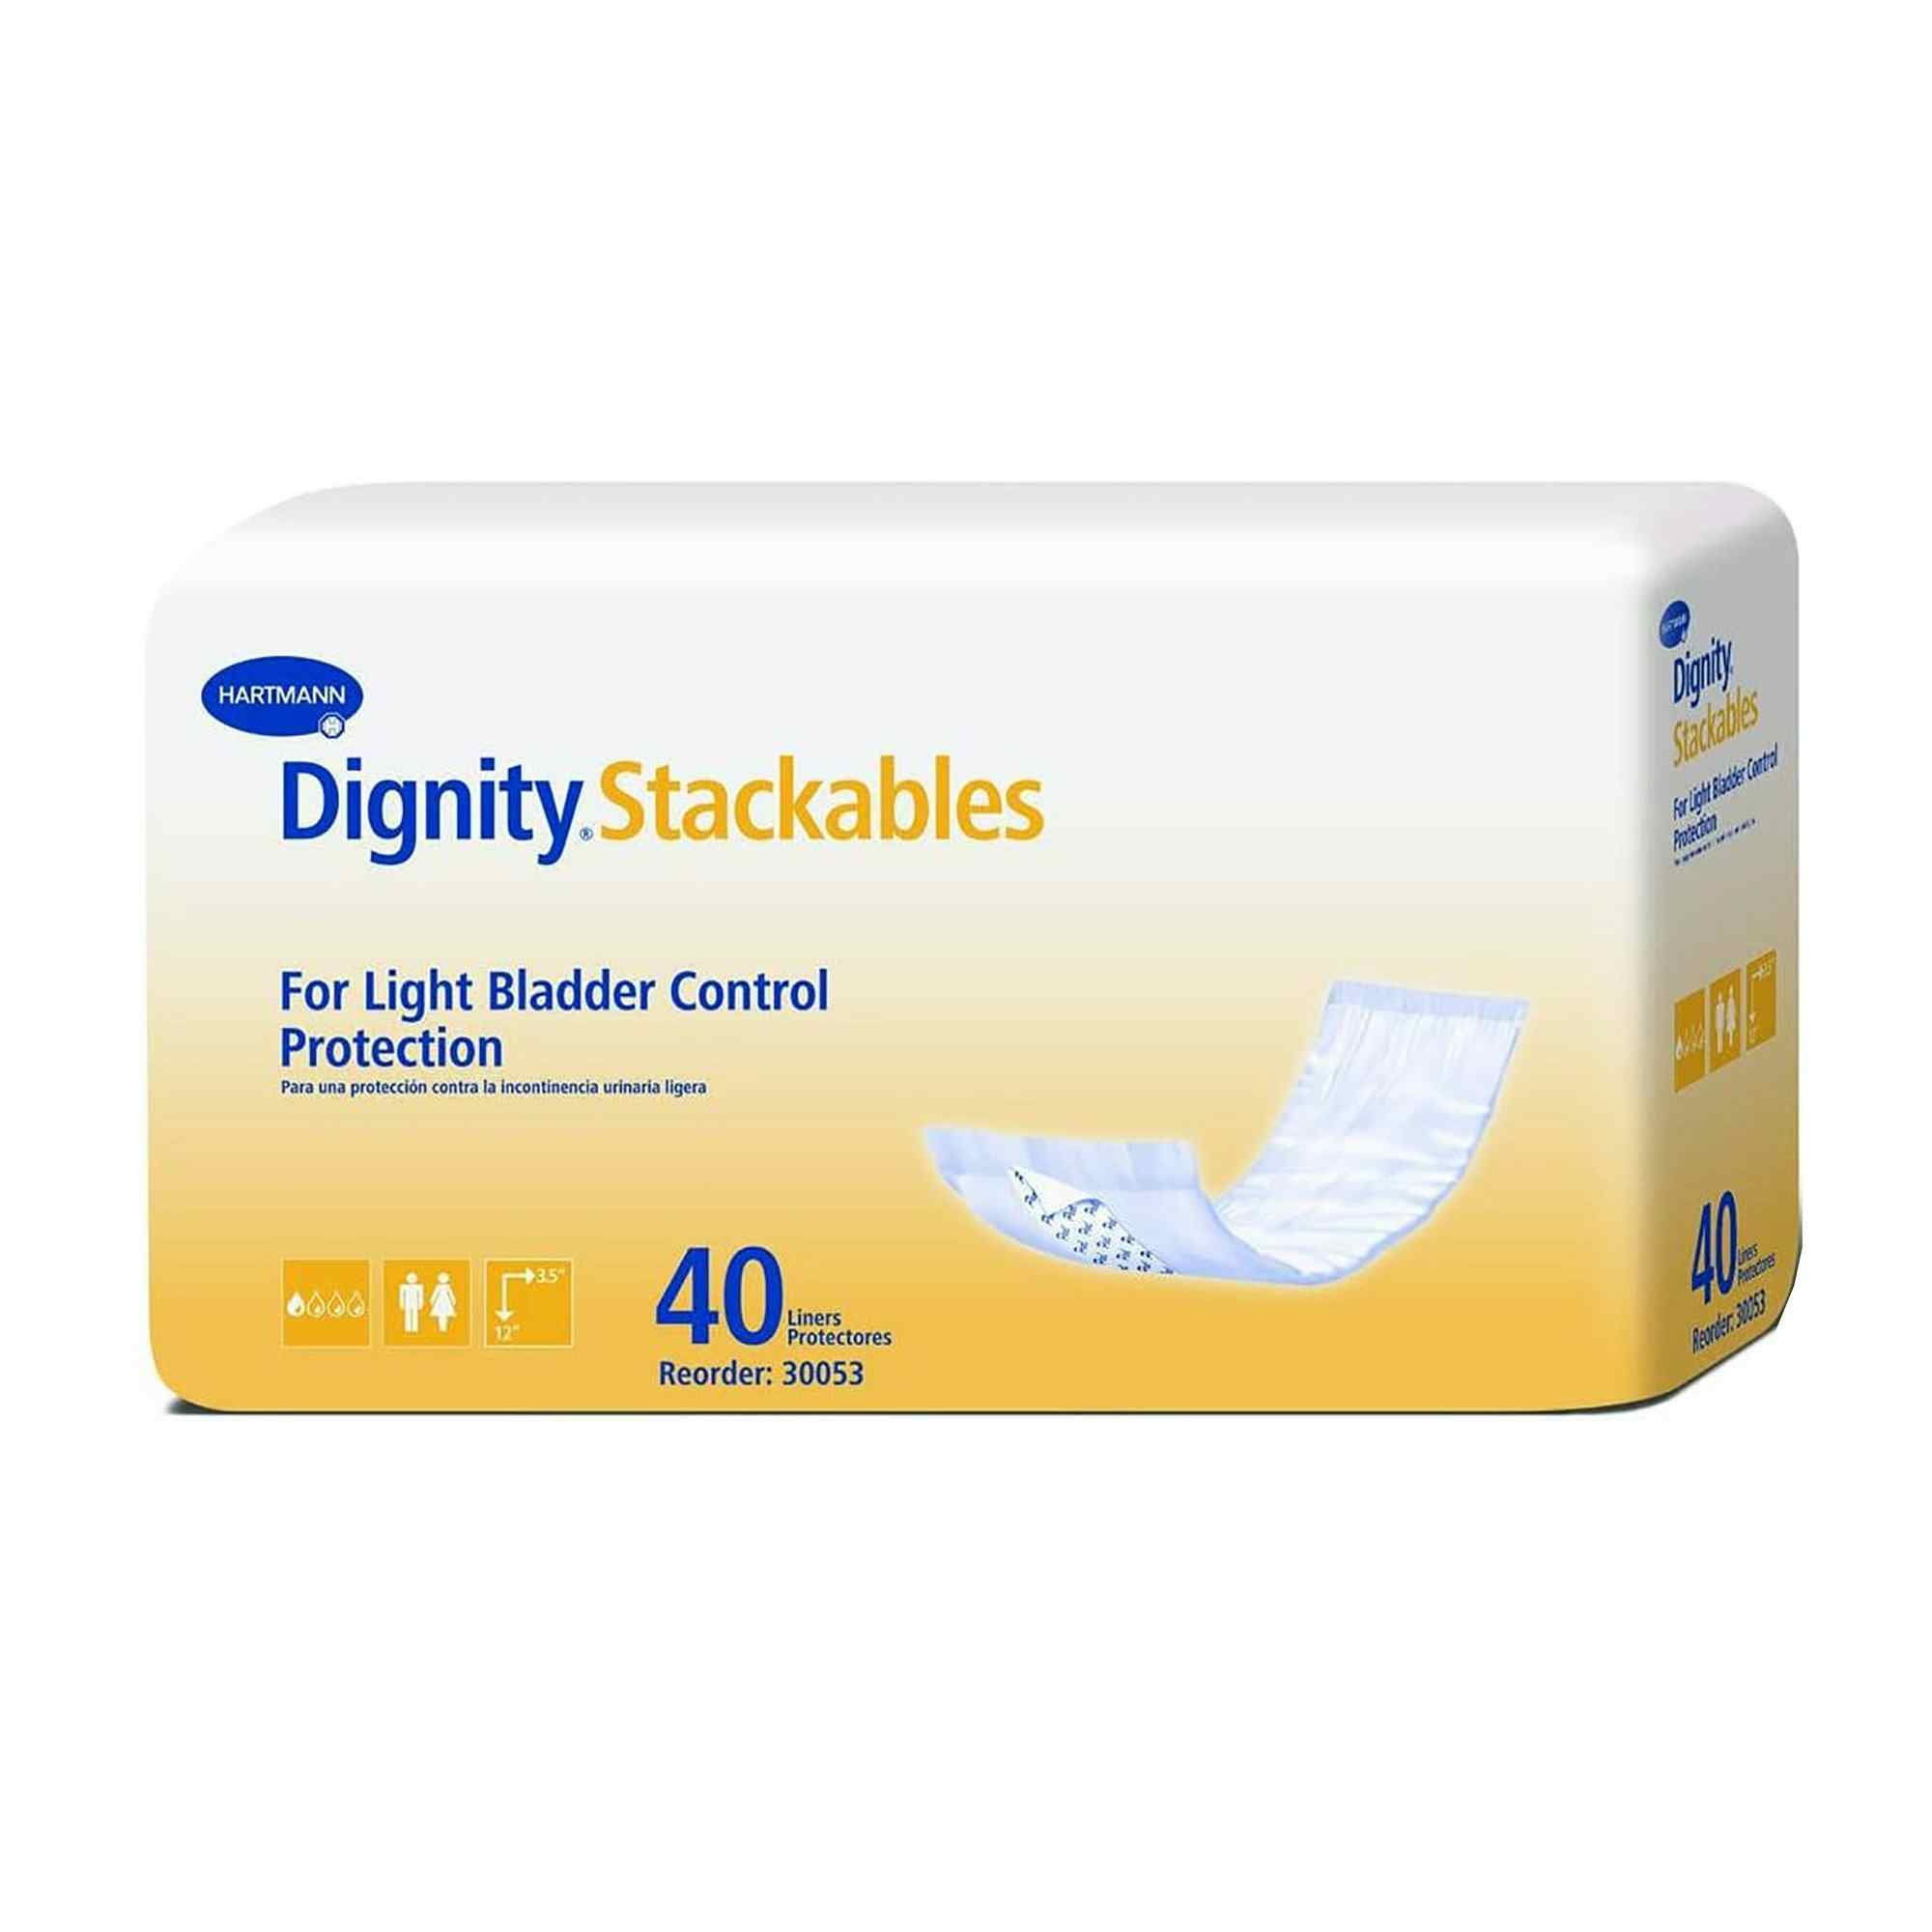 Dignity Stackables Adult Unisex Disposable Bladder Control Pad, Light Absorbency, 30053-180, Medium (3.5-12") - Case of 180 Pads (4 Packs)